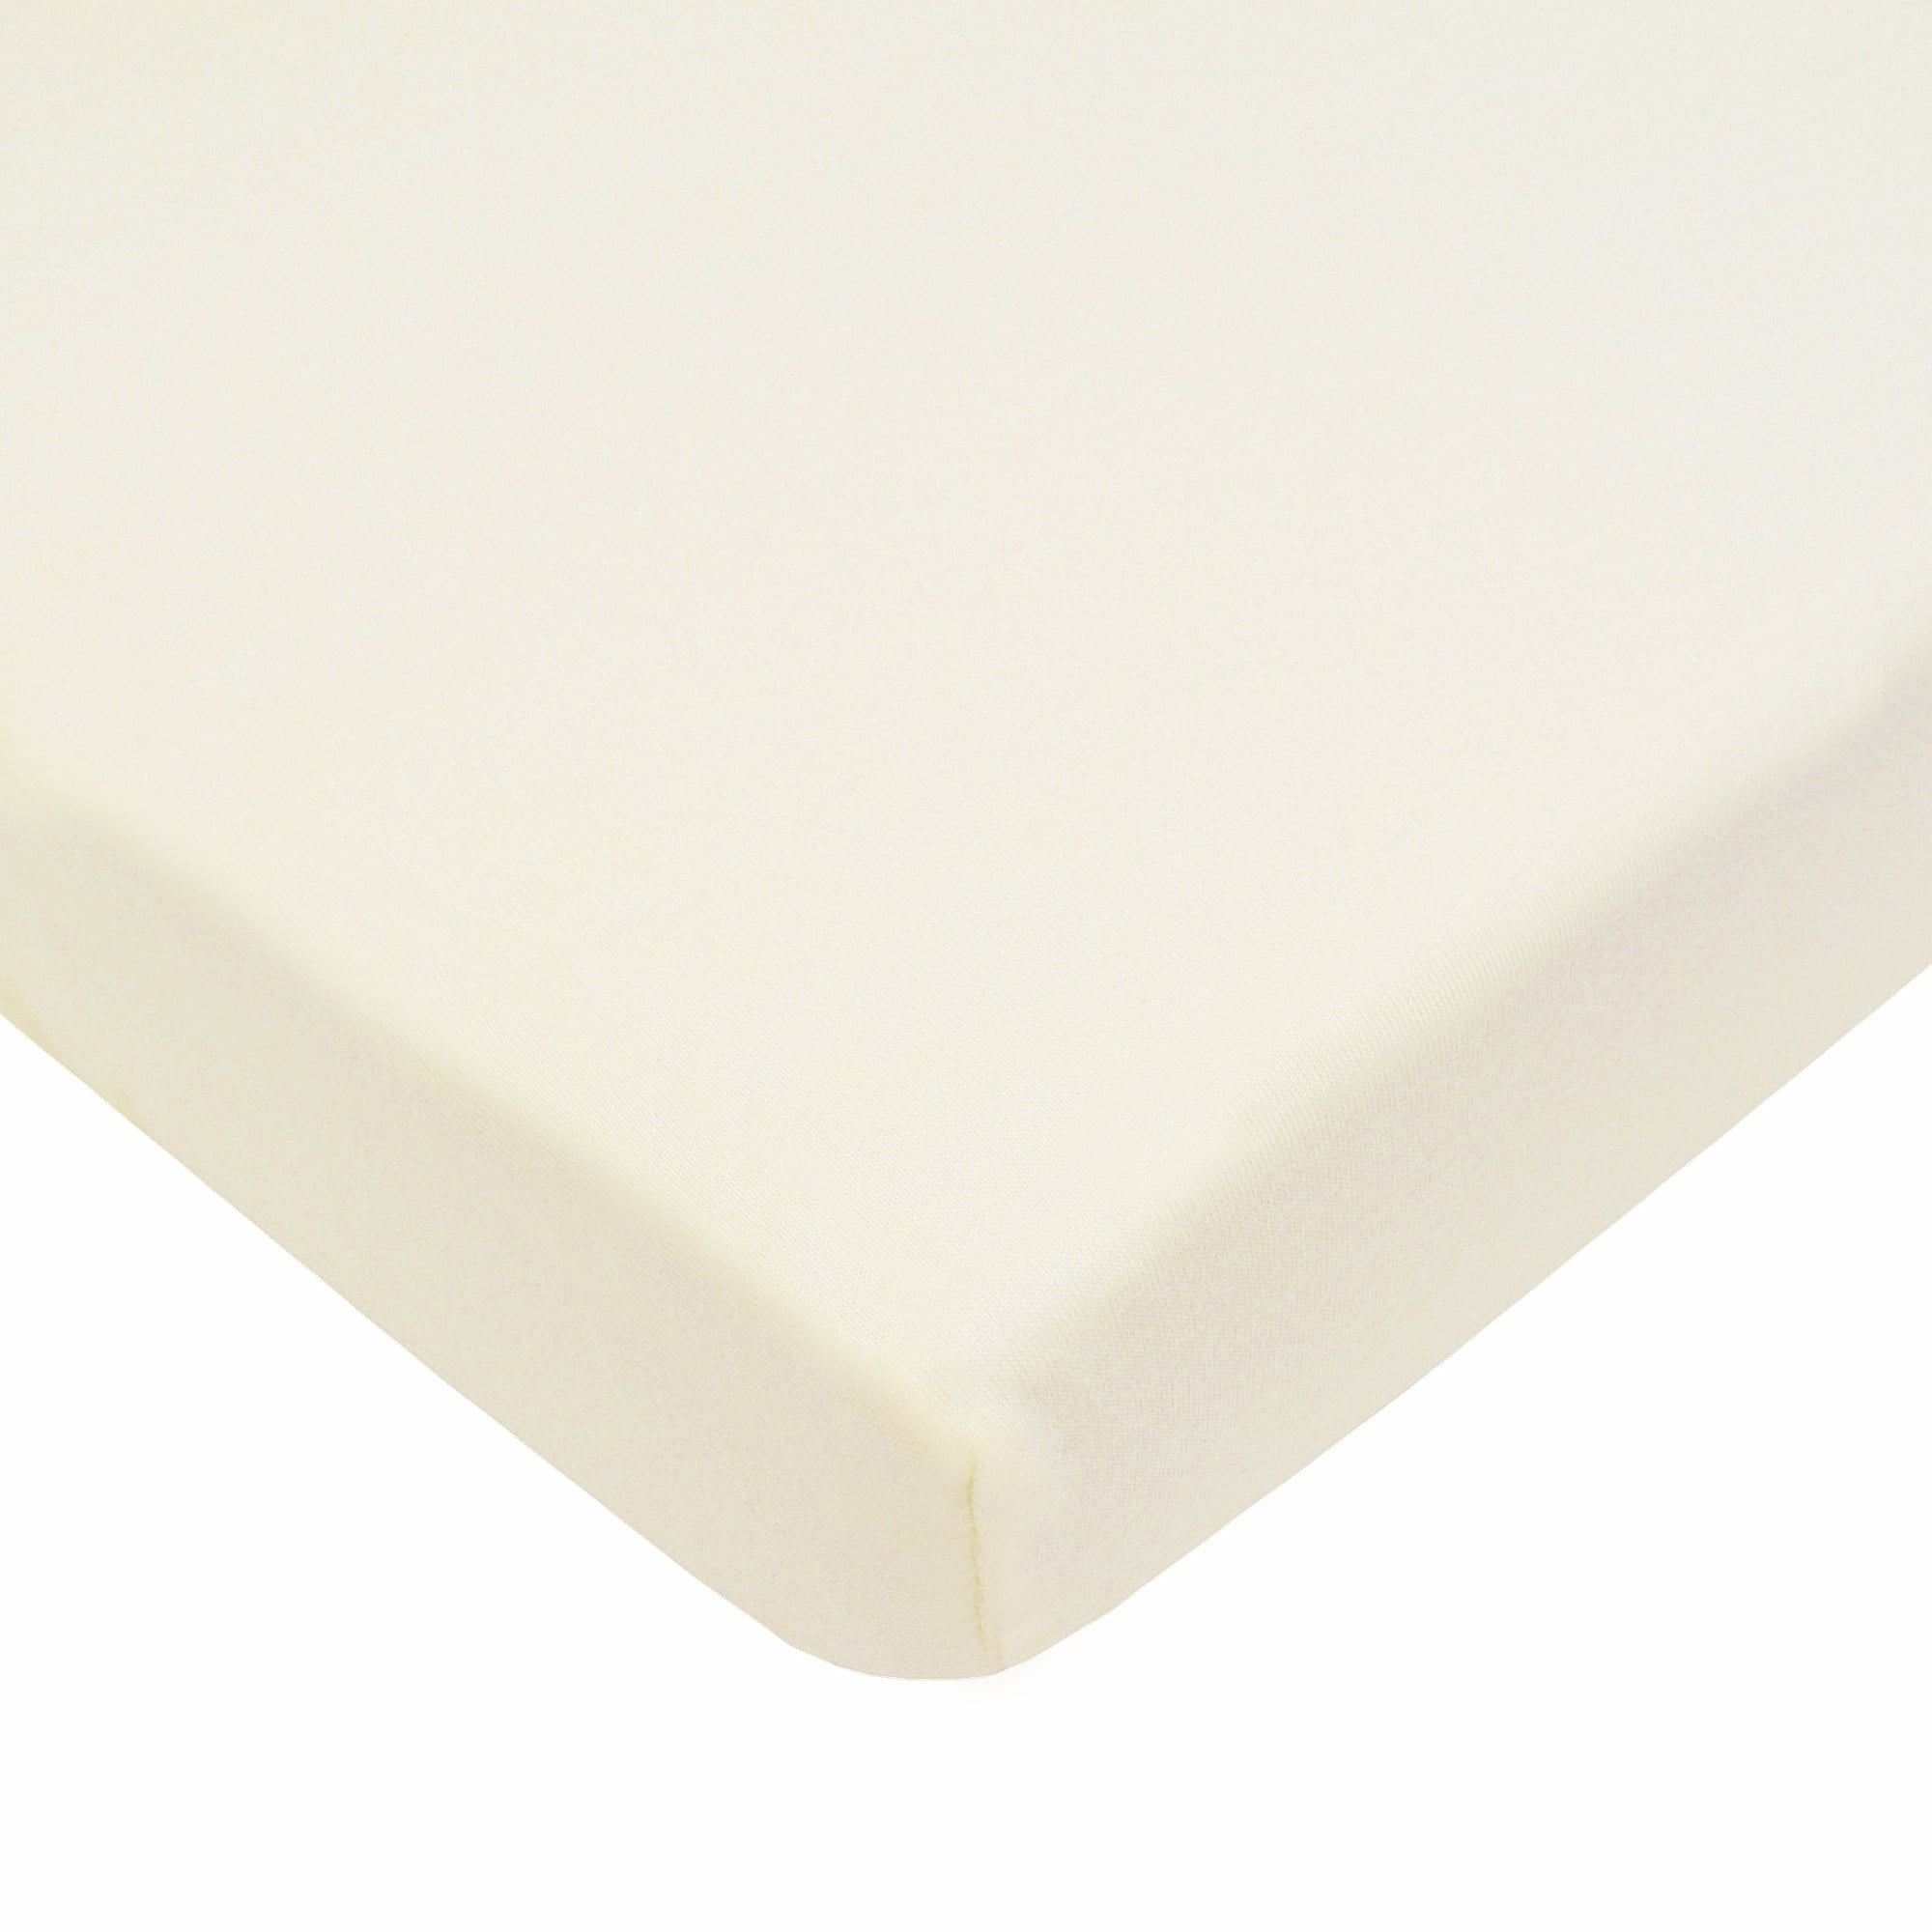 Supersoft Baby Crib Craddl Cot mattress Extra Thick Supreme Quality Made in UK 